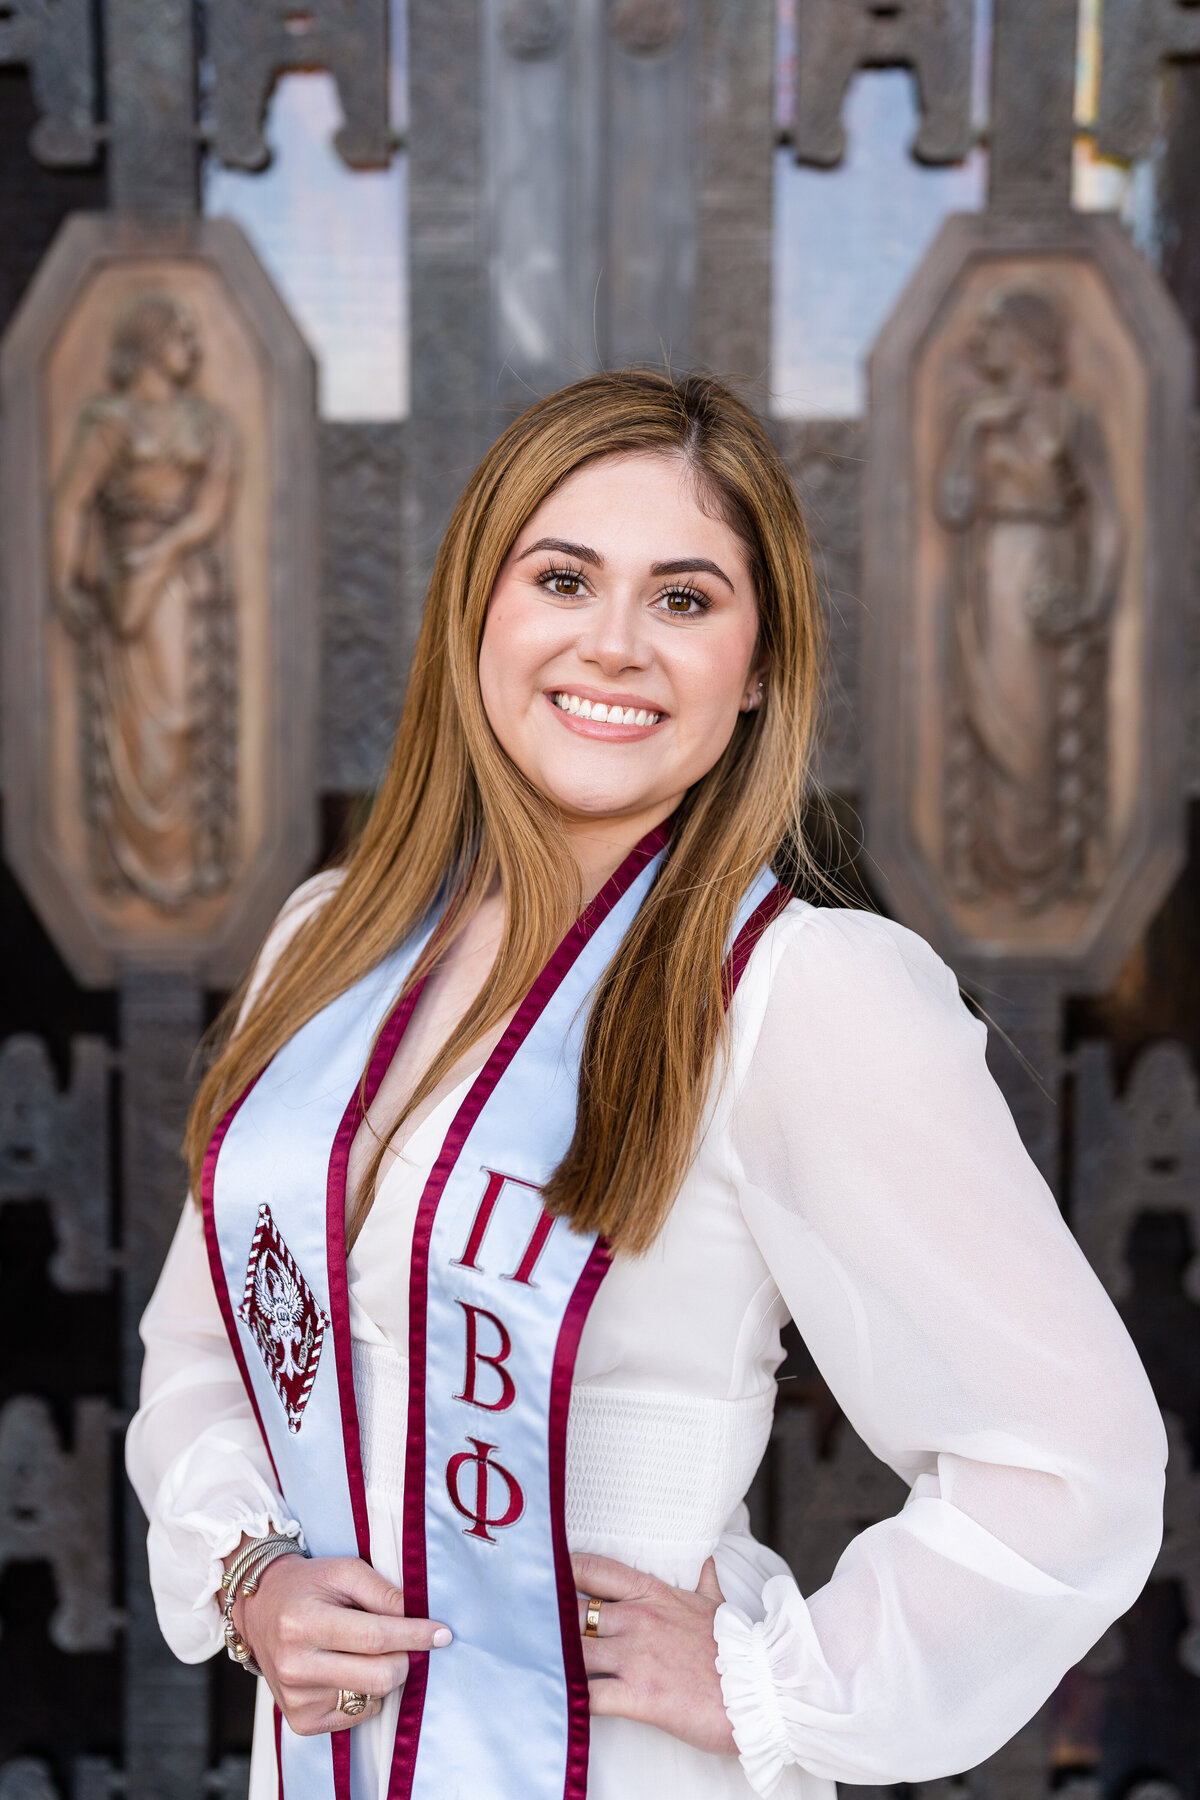 Texas A&M senior girl smiling with hand on hip and standing in front of Administration Building front doors  while wearing Pi Phi sorority stole and white dress